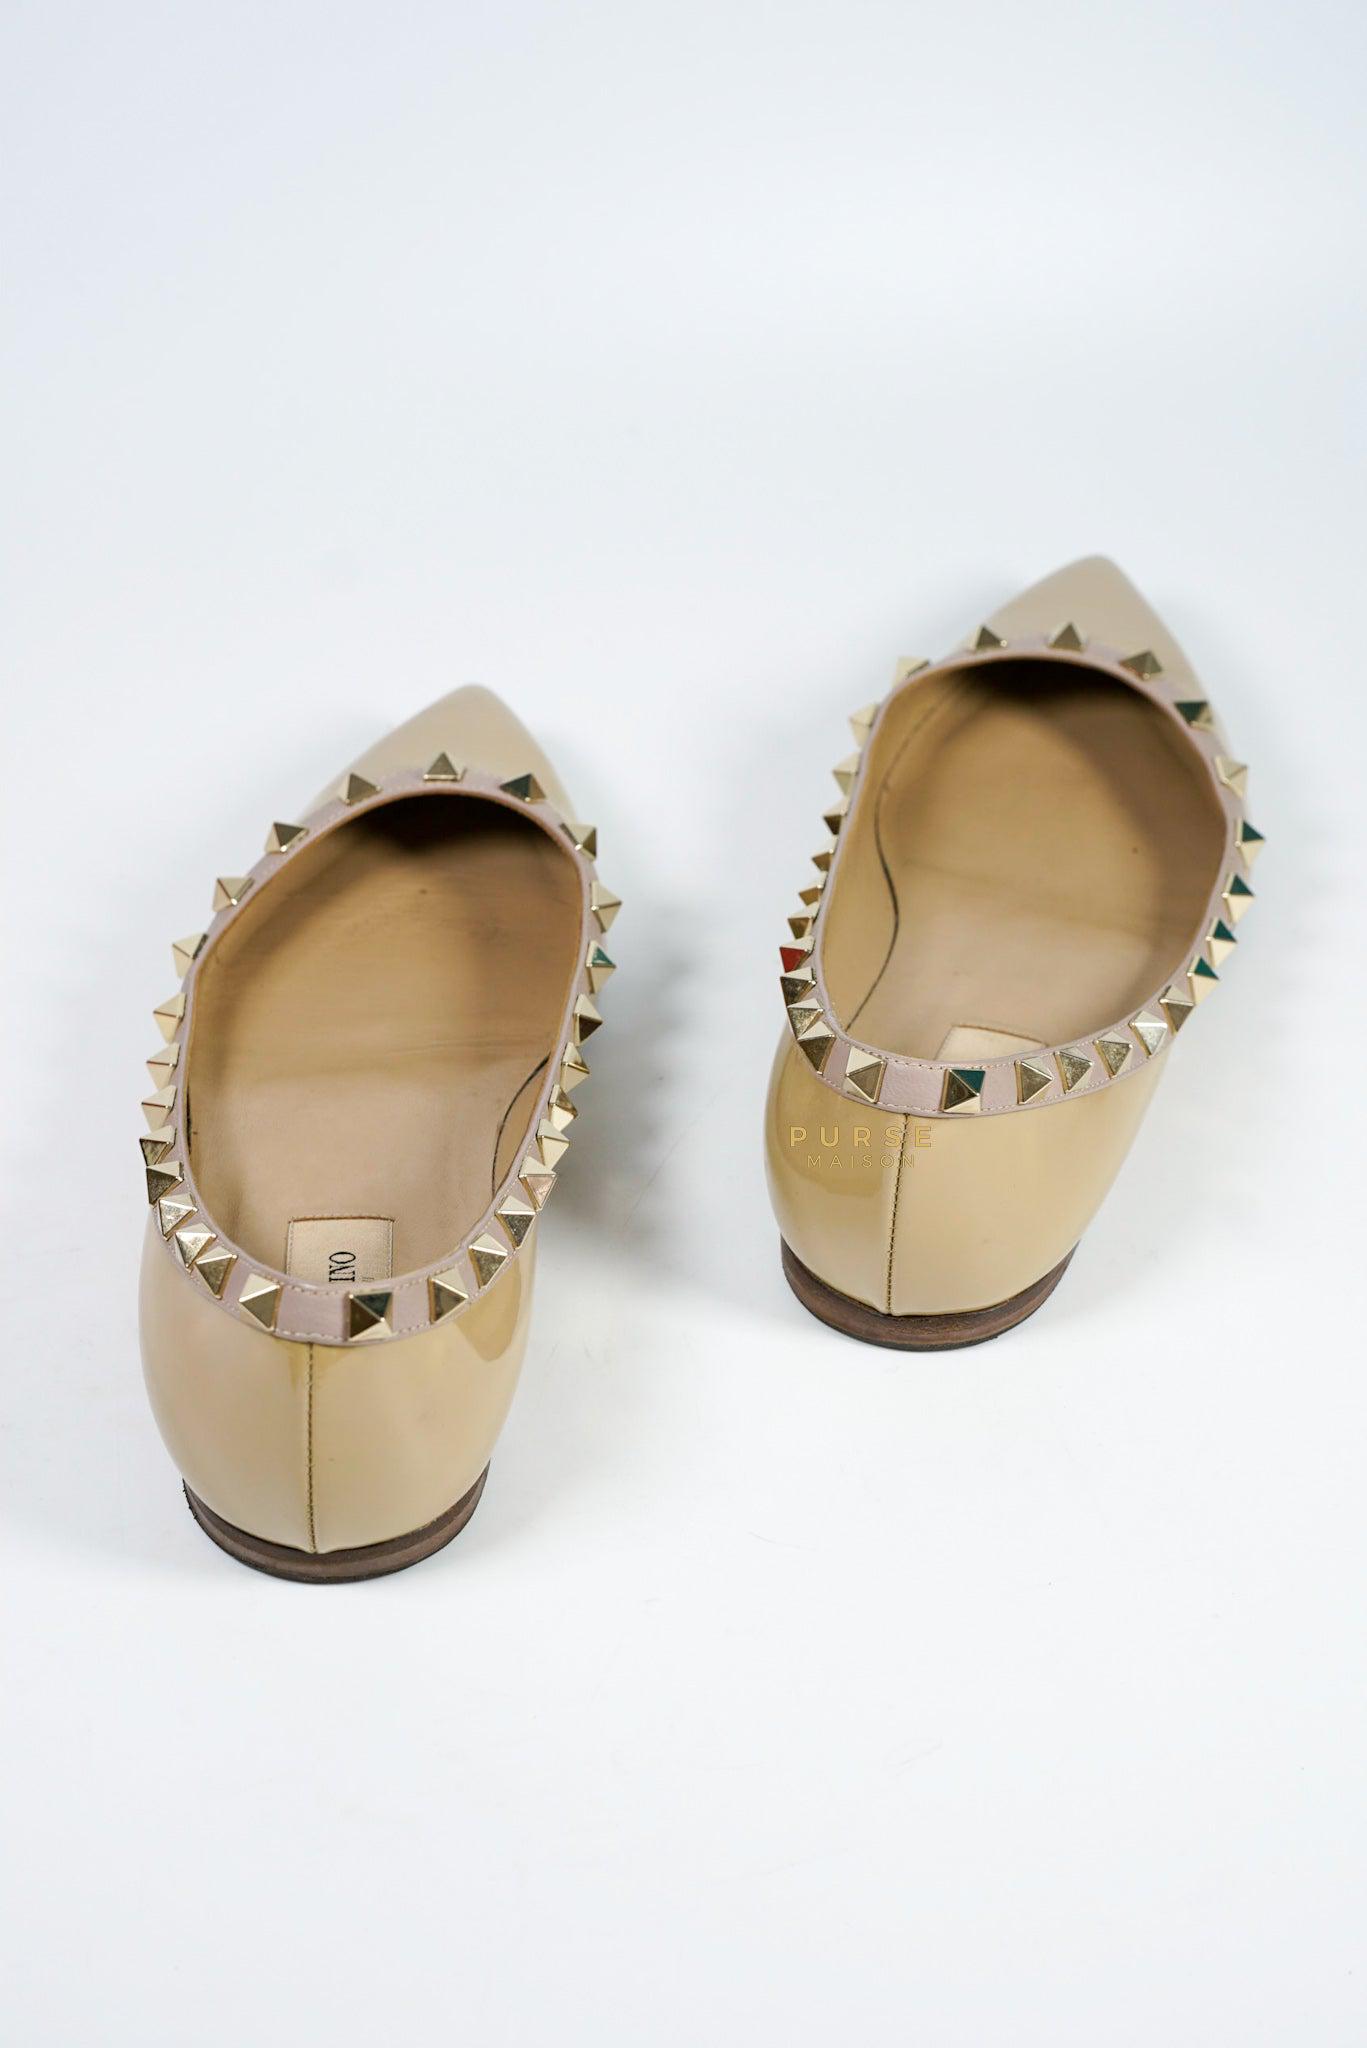 Valentino Rockstud Ballerina in Nude Patent Leather Shoes (Size 37.5 EUR, 25cm)